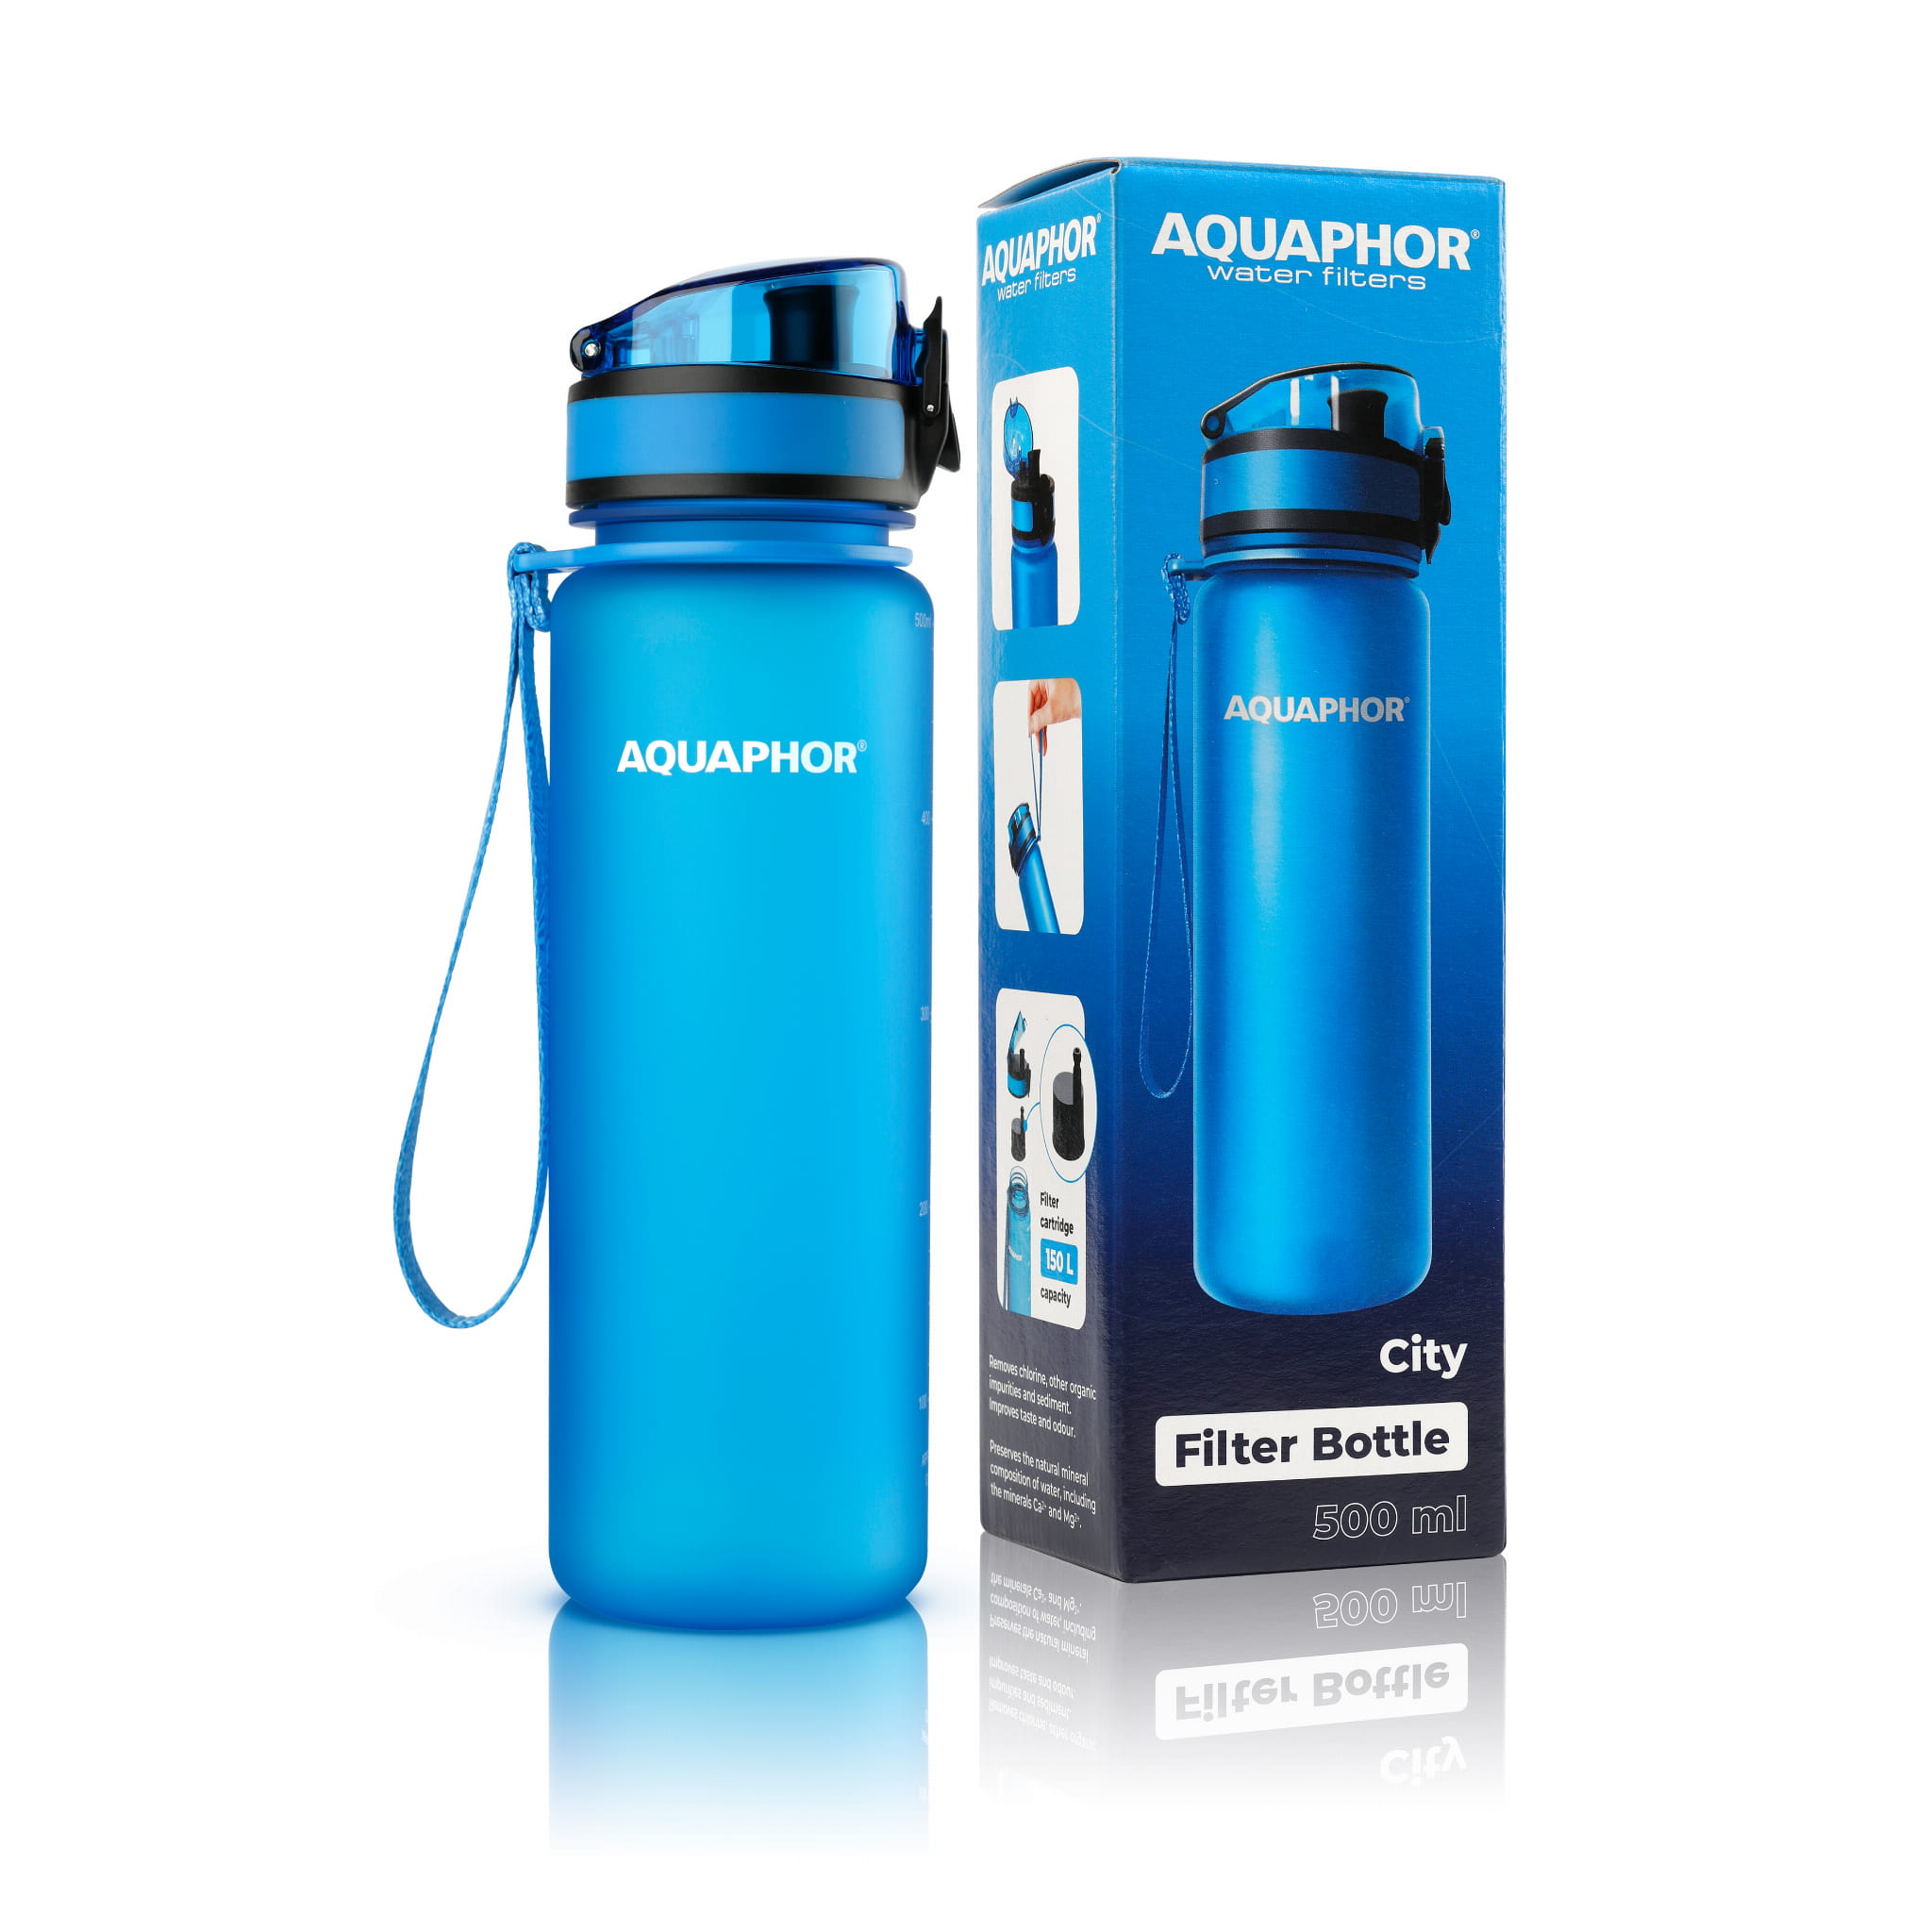 Aquaphor Water Filters City Filter Bottle 500ml RRP £13.99 CLEARANCE XL £8.99